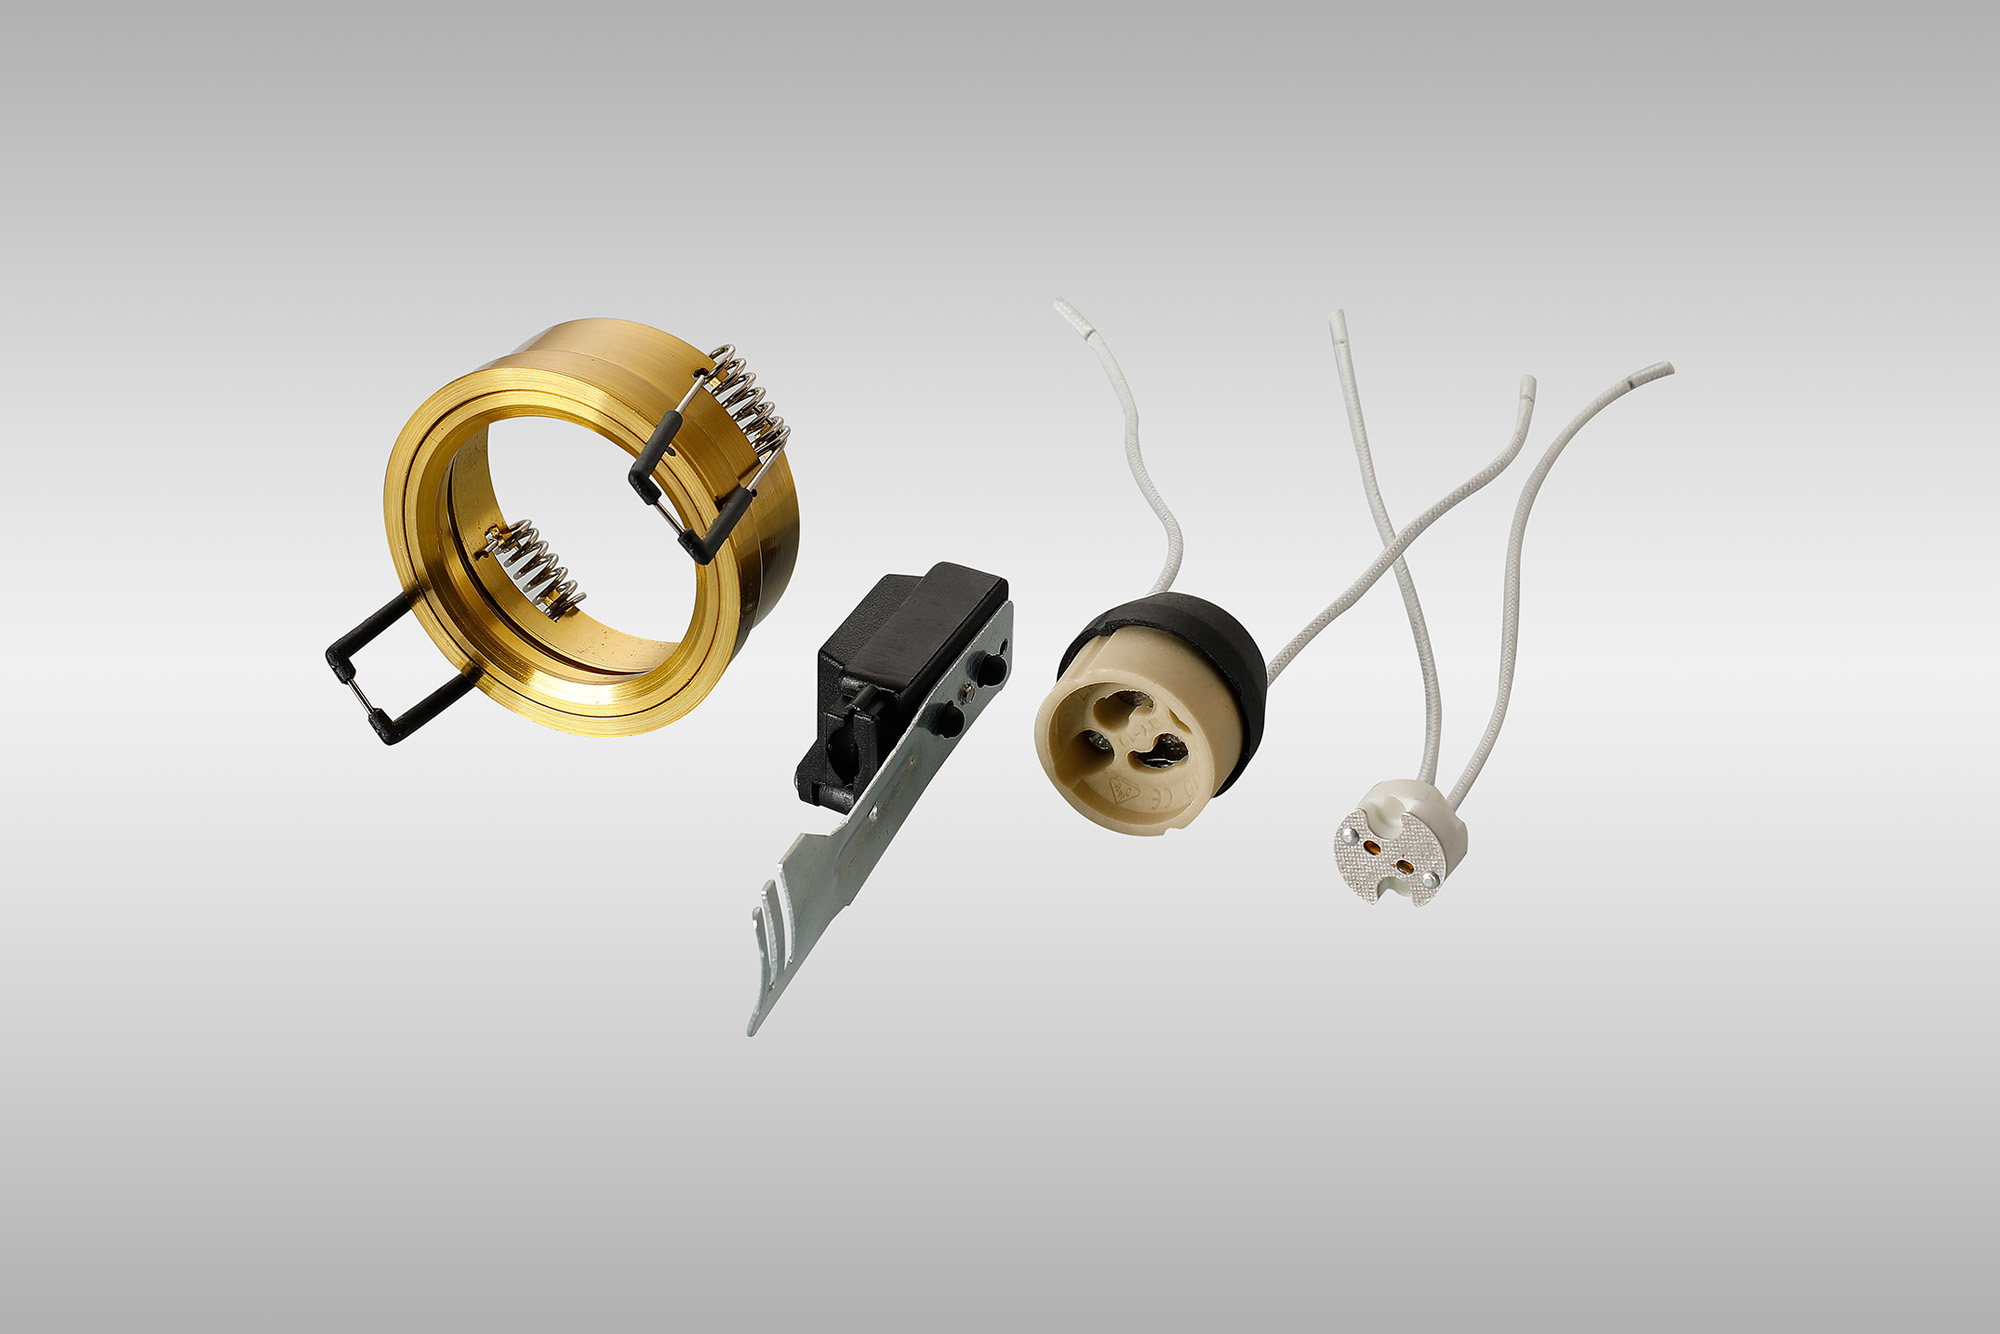 IL30800BR  Aged Brass Downlight Component Kit With Lampholders